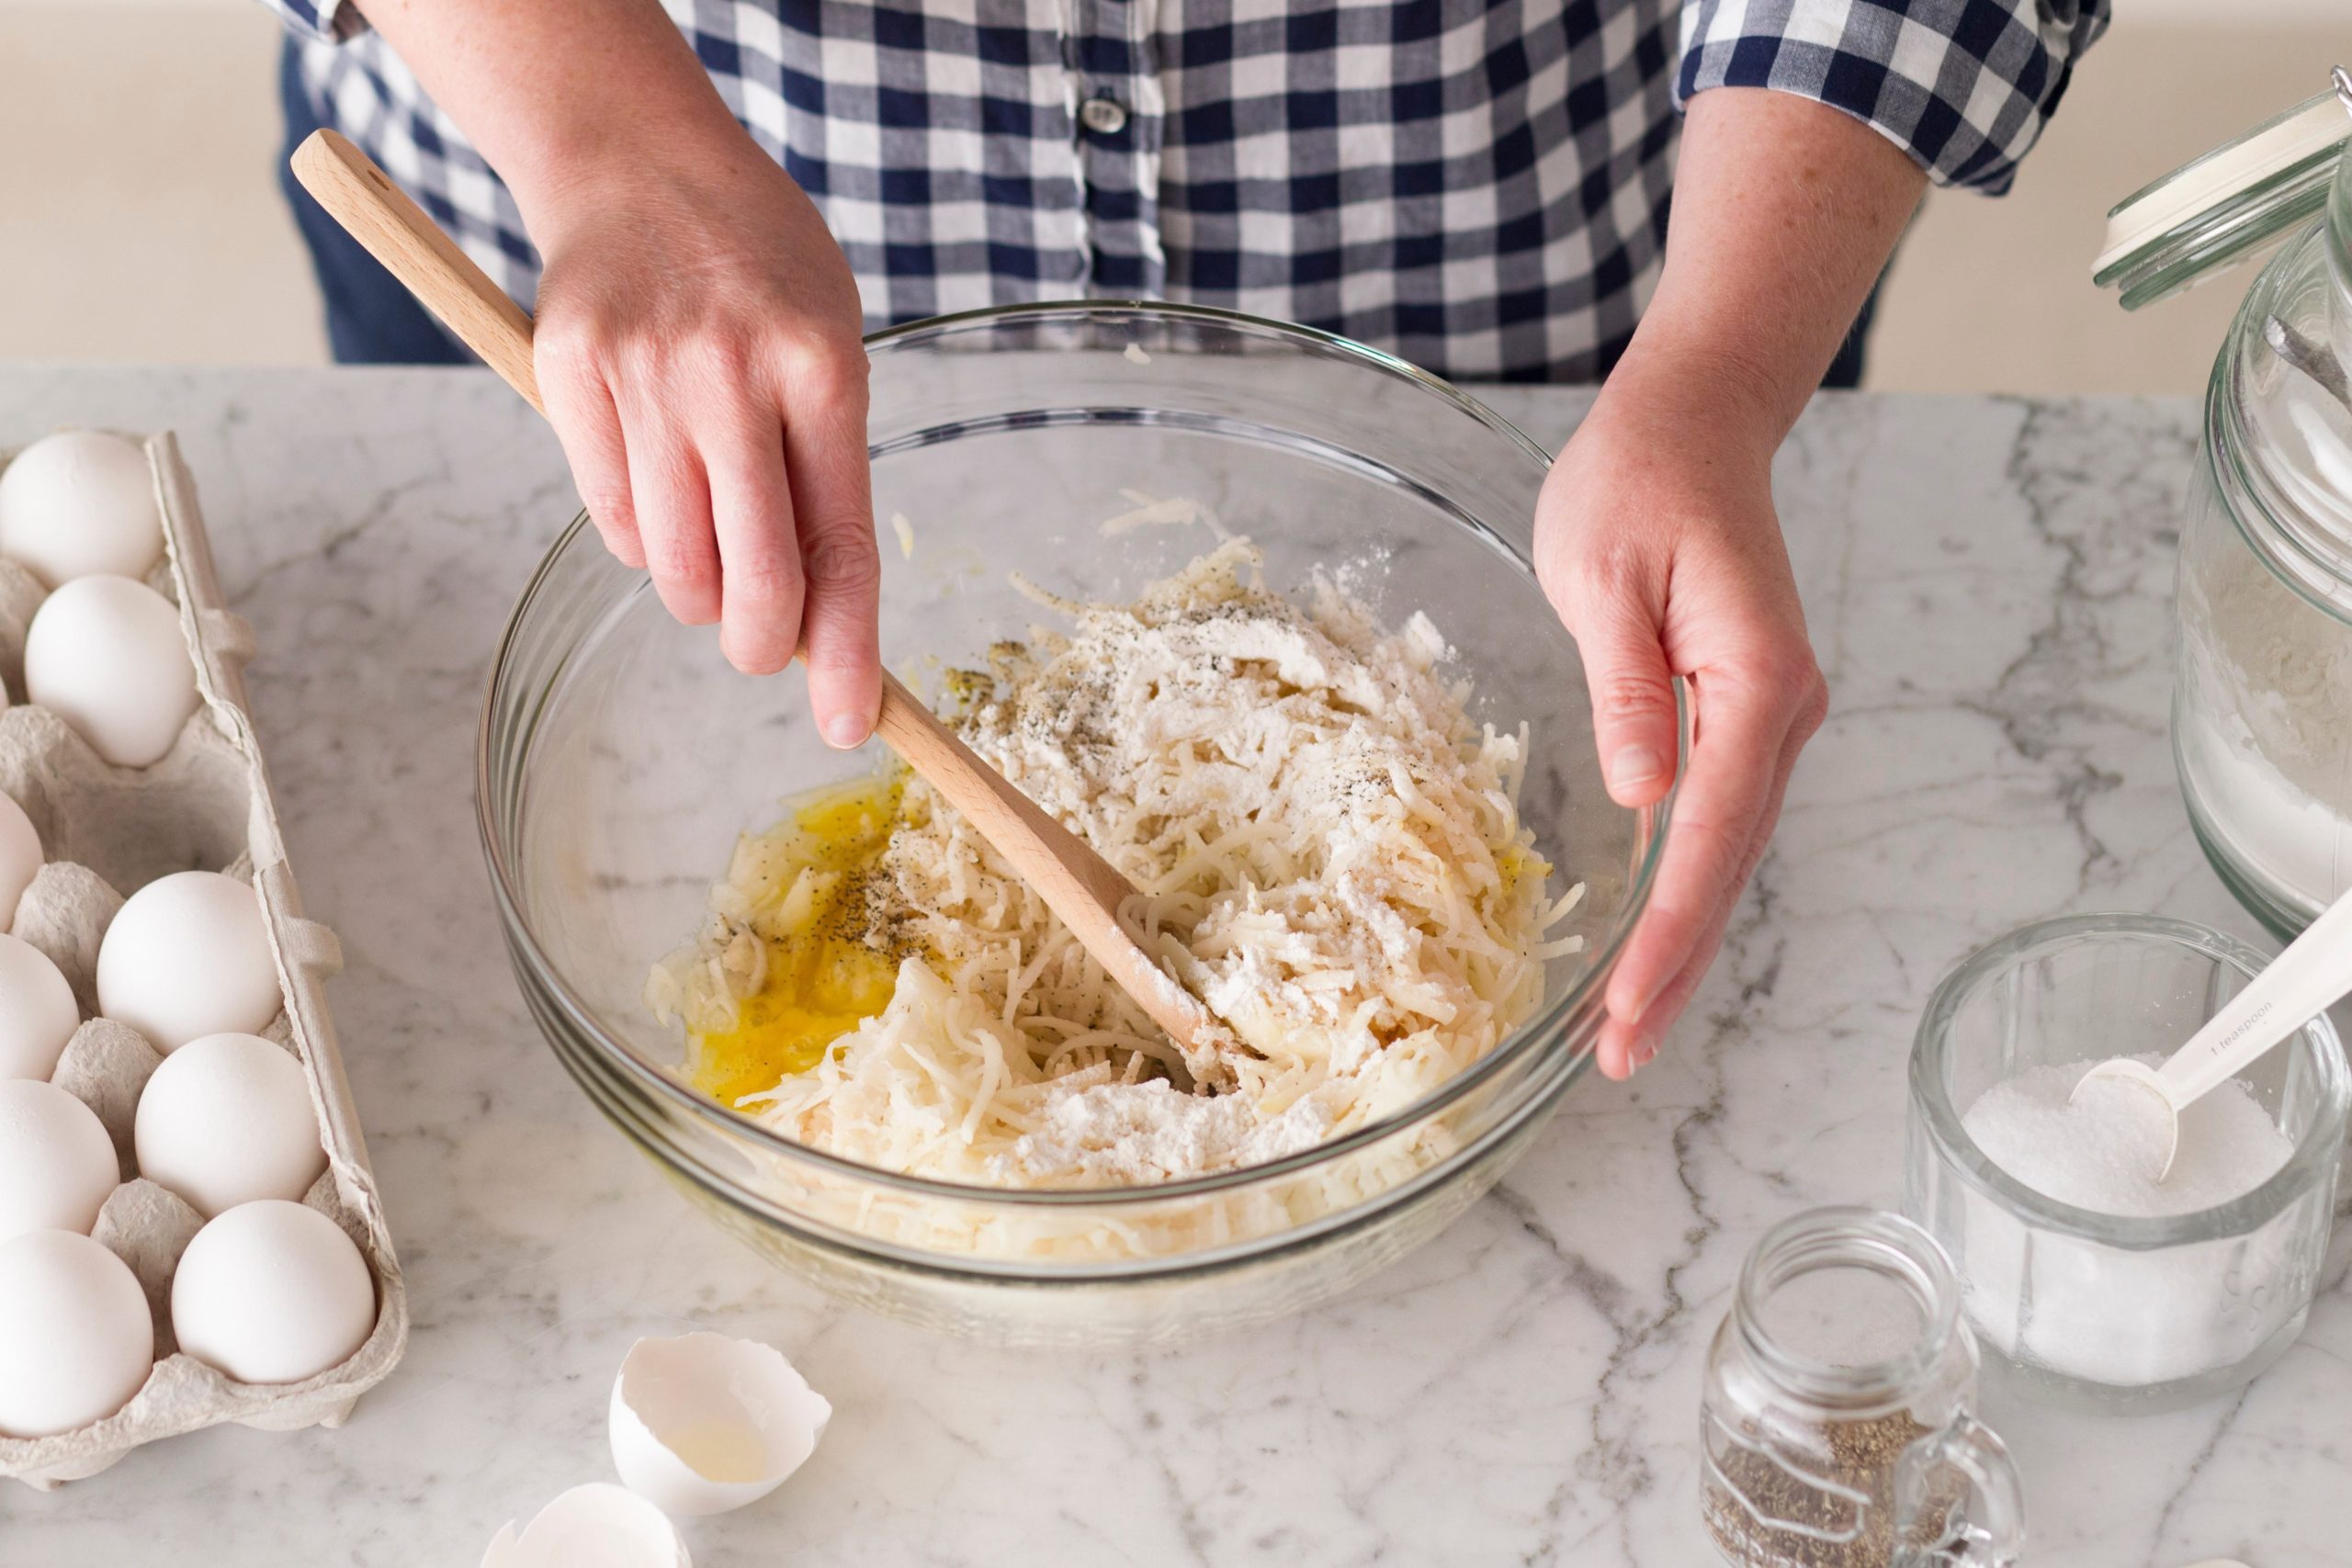 Using a wooden spoon, all of the ingredients are mixed together in a glass bowl